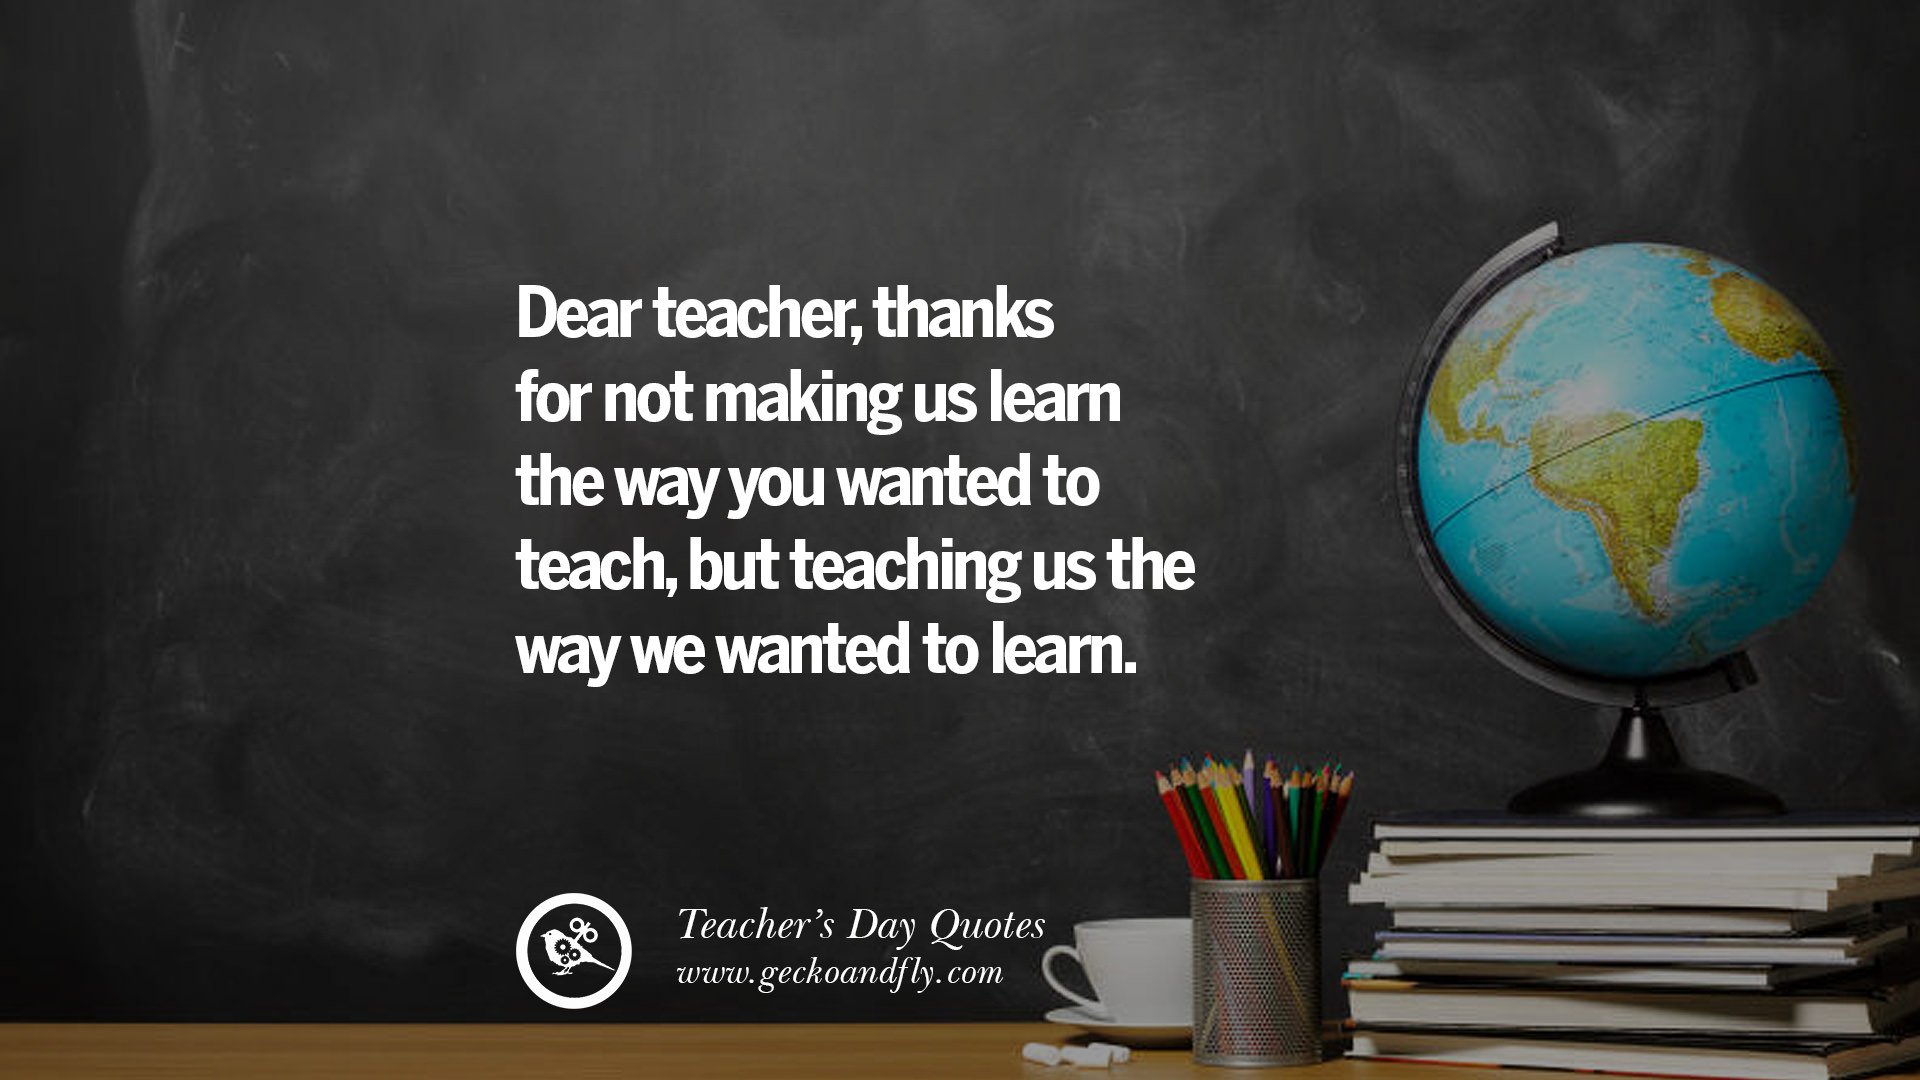 Happy Teachers' Day Quotes & Card Messages